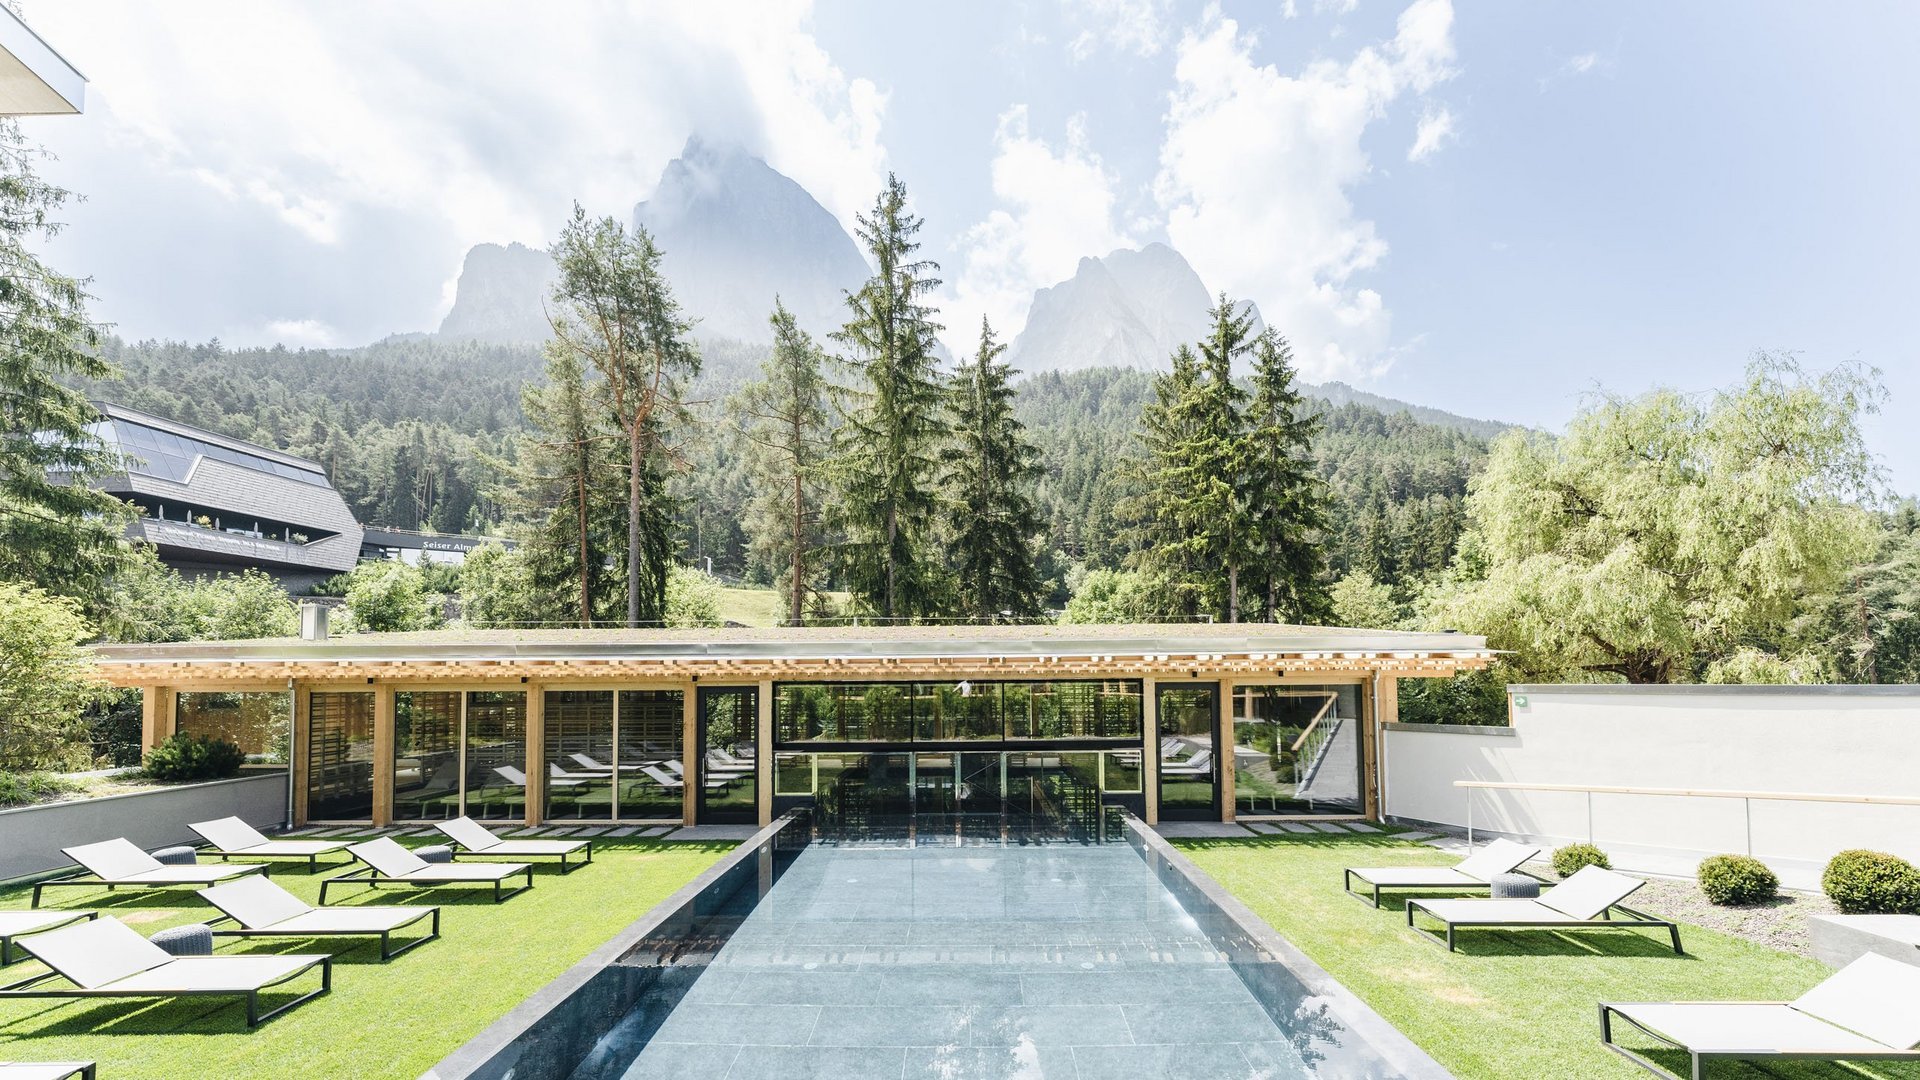 Our bath house in the Dolomites UNESCO World Heritage